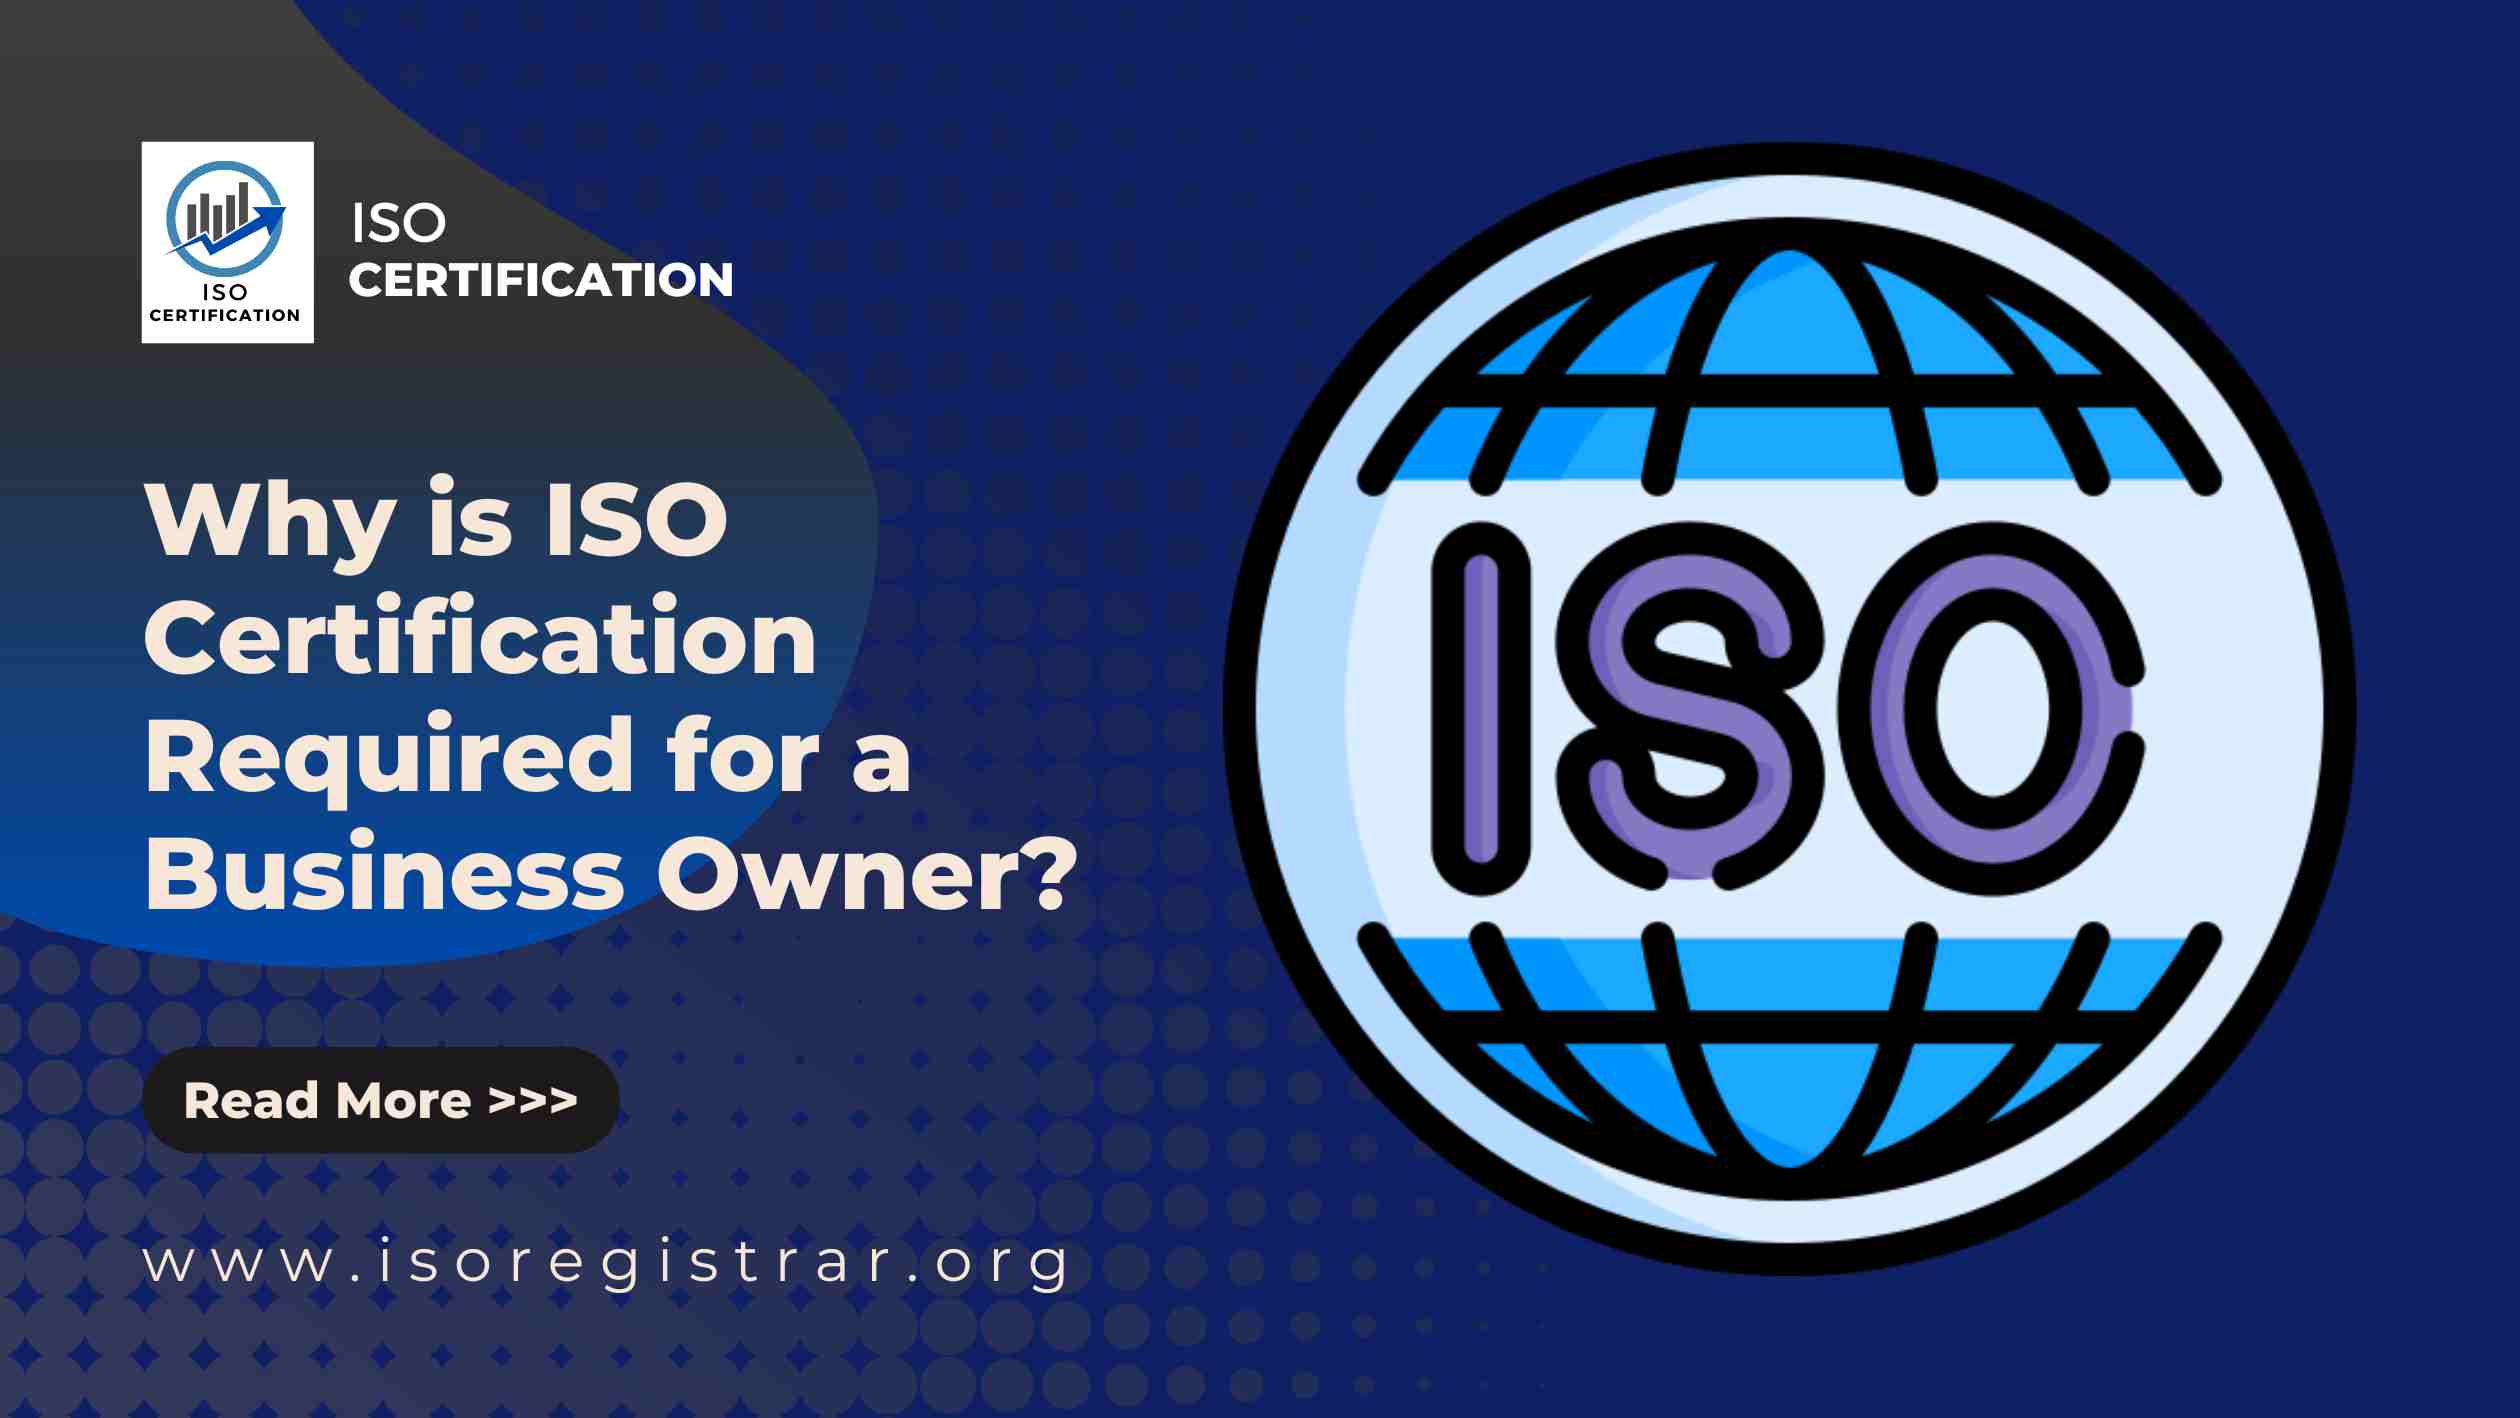 Why is ISO Certification Required for a Business Owner?